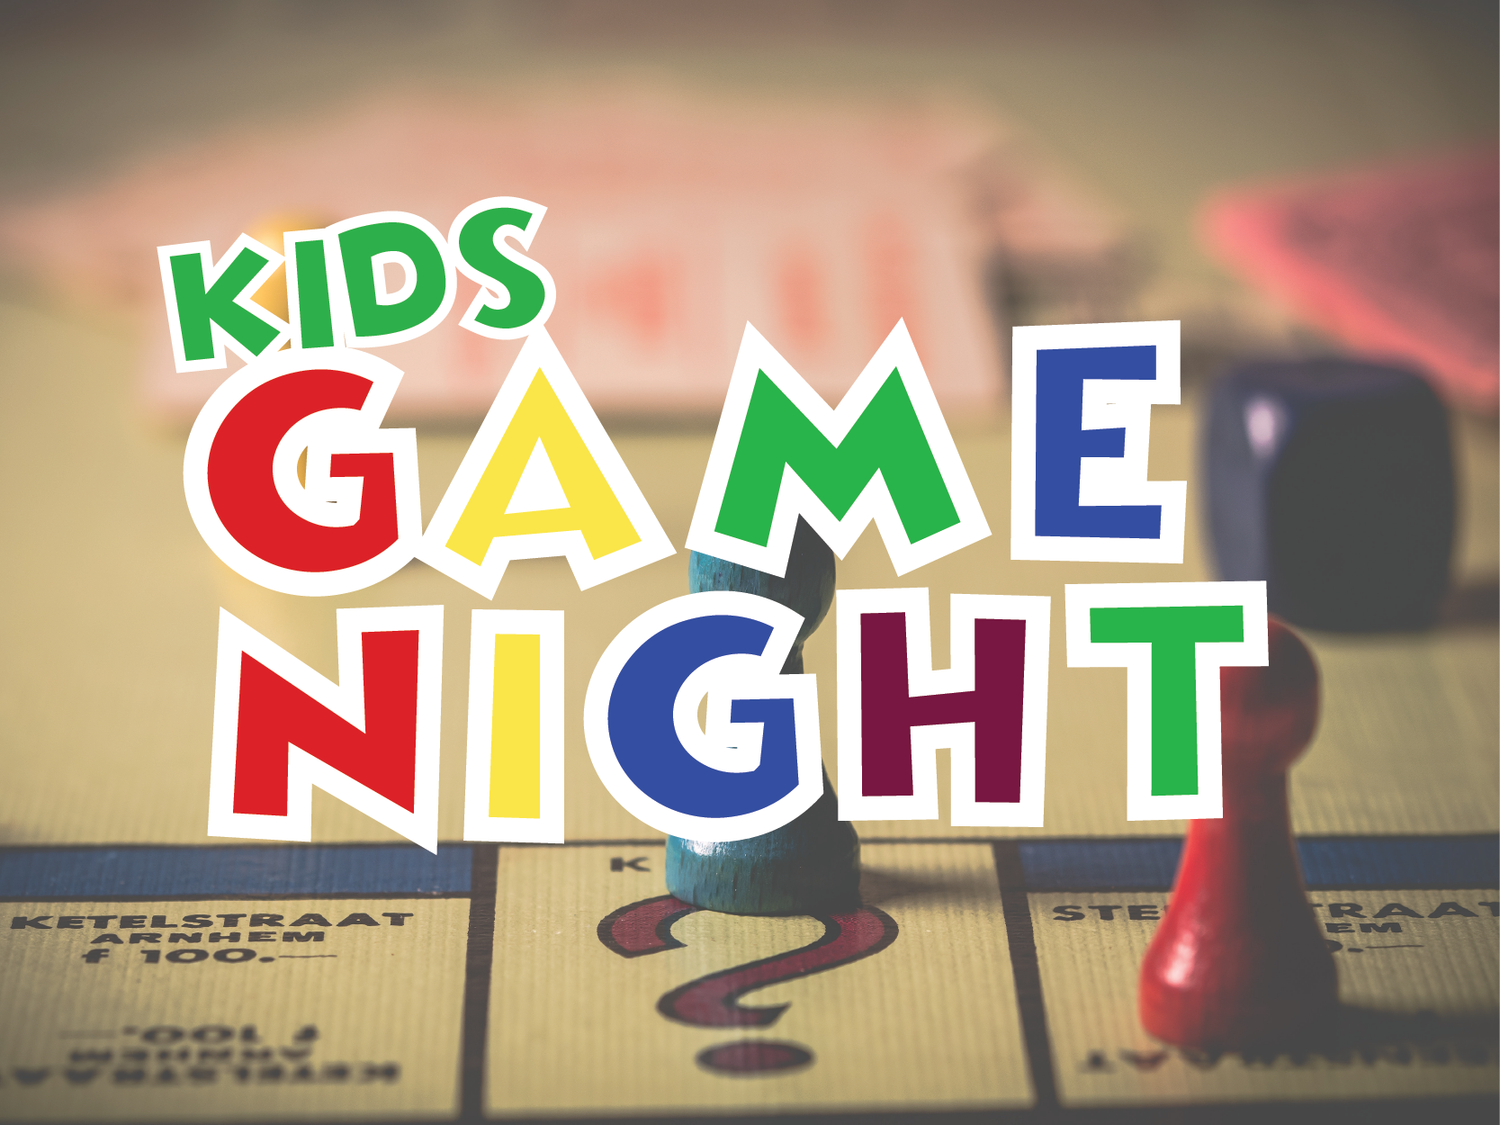 Kids Game Night graphic with board game image in the background